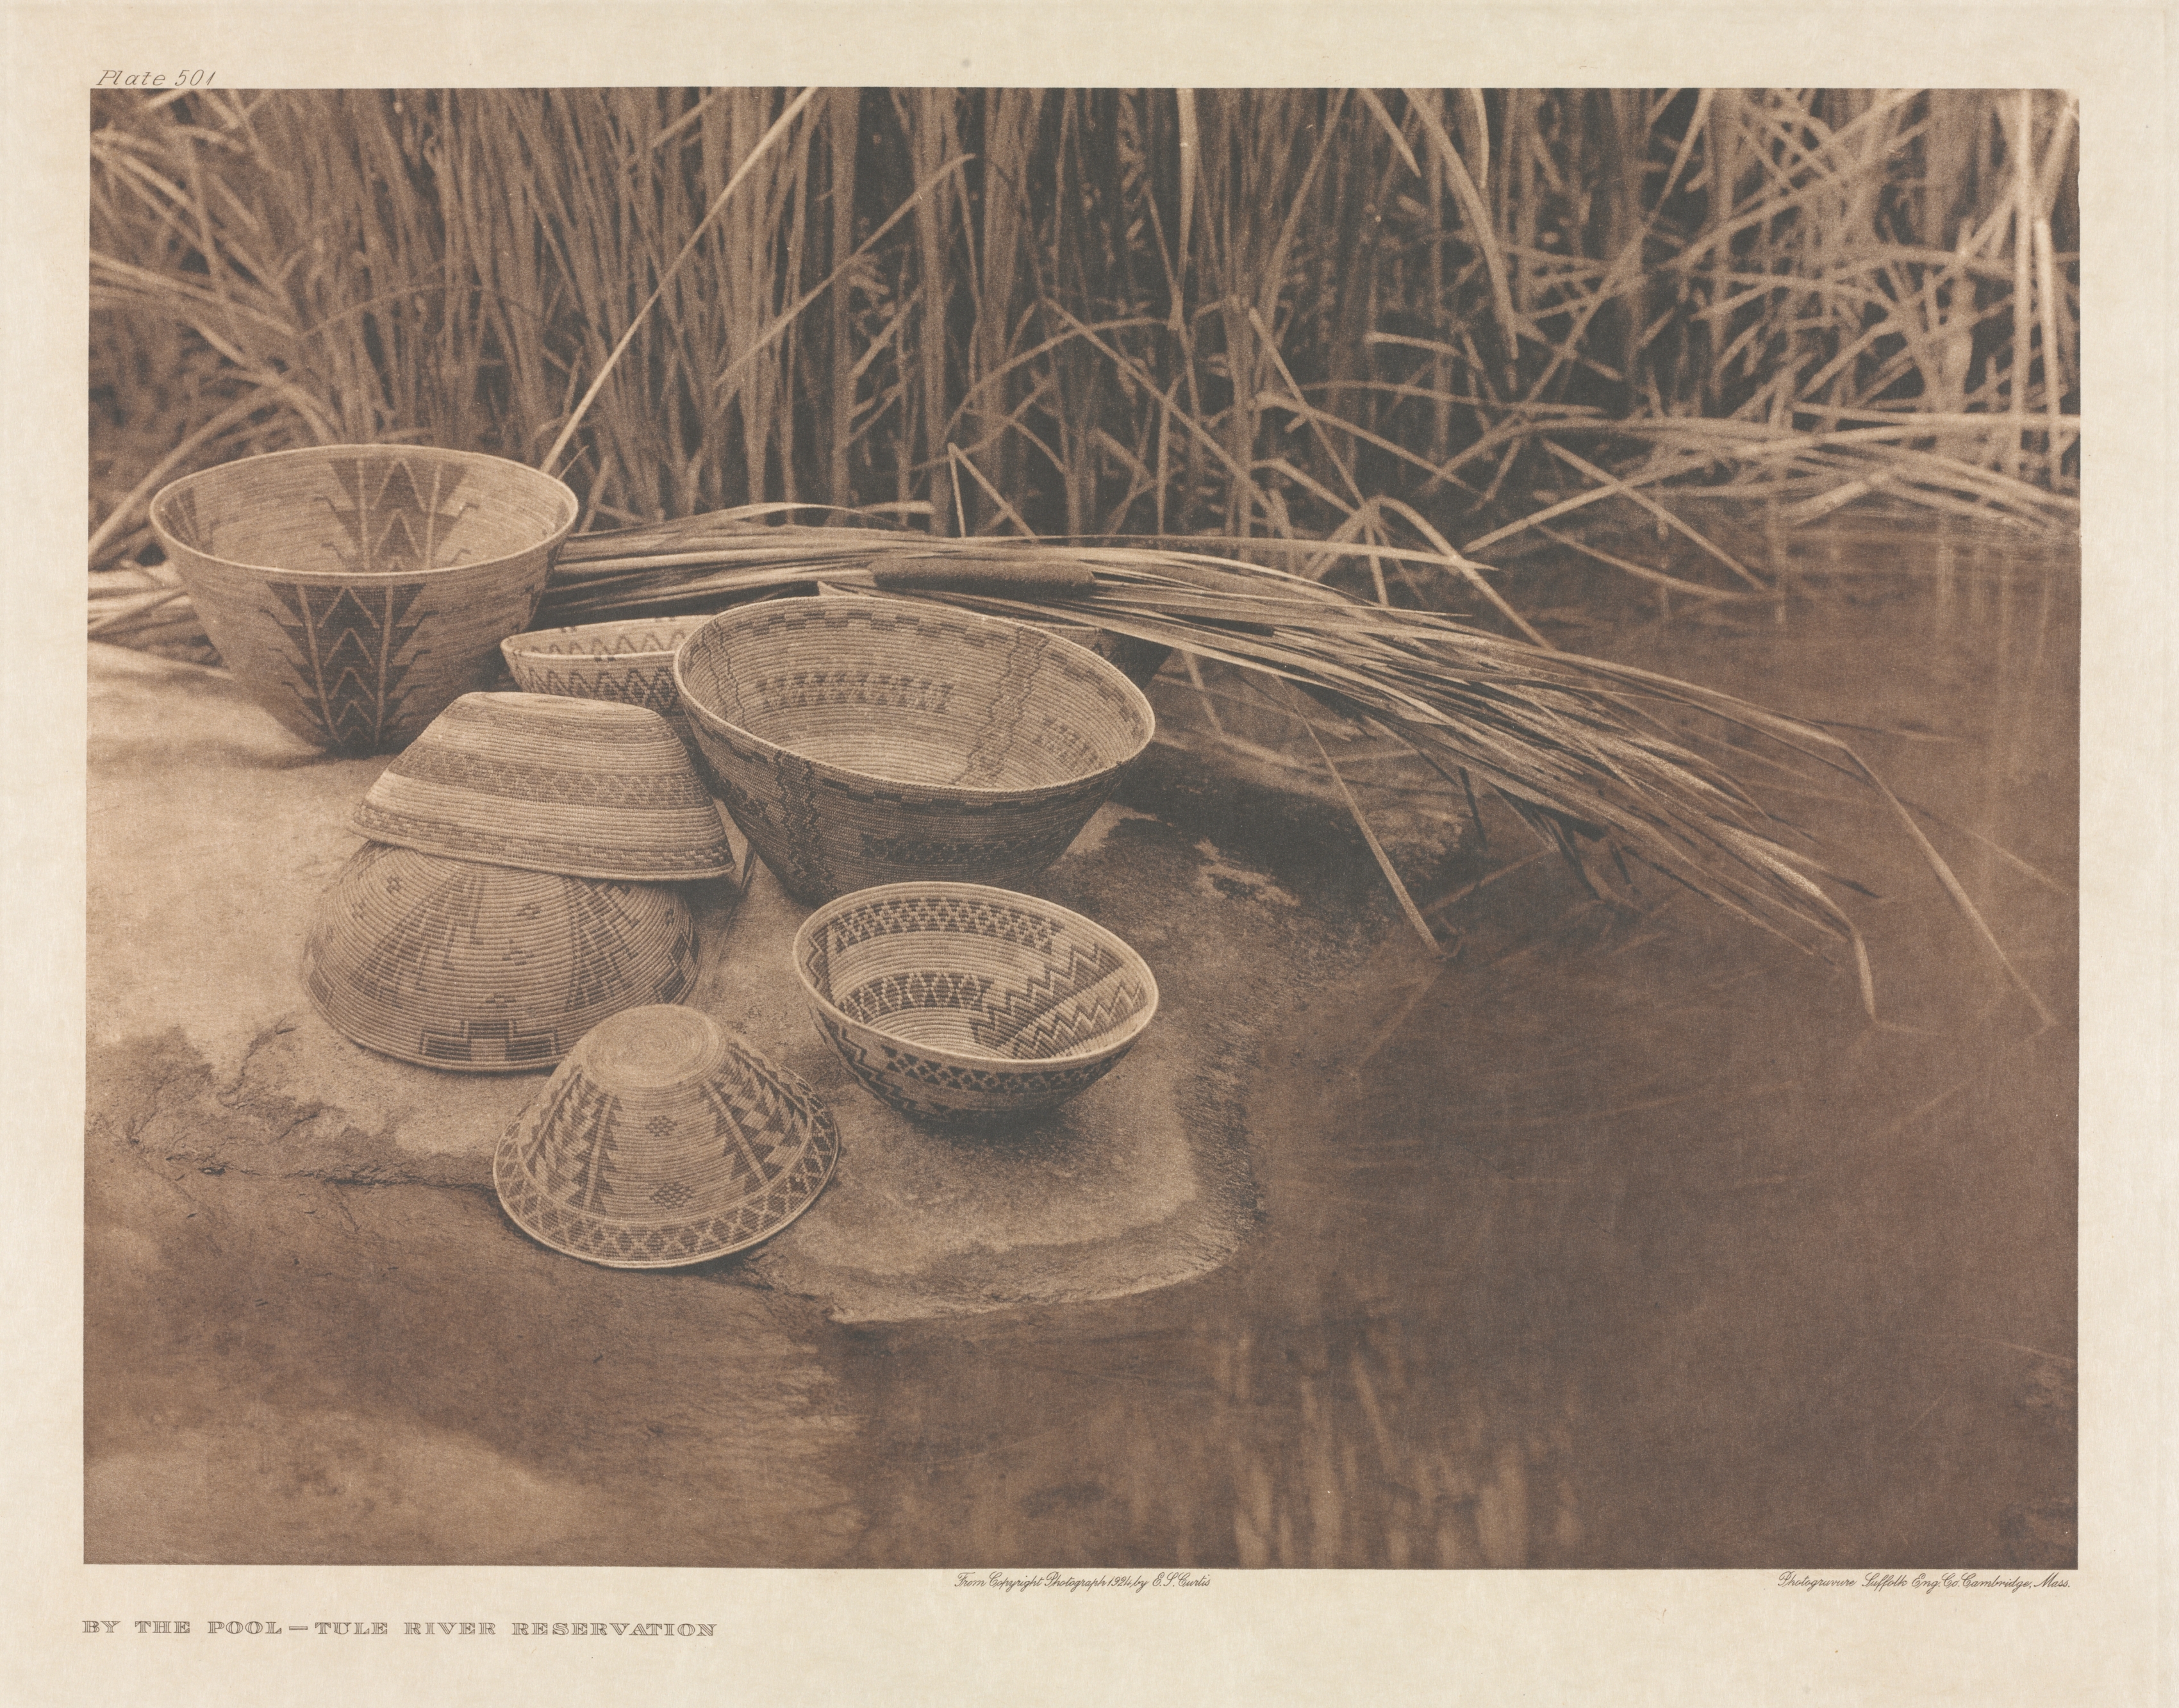 Portfolio XIV, Plate 501: By the Pool - Tule River Reservation